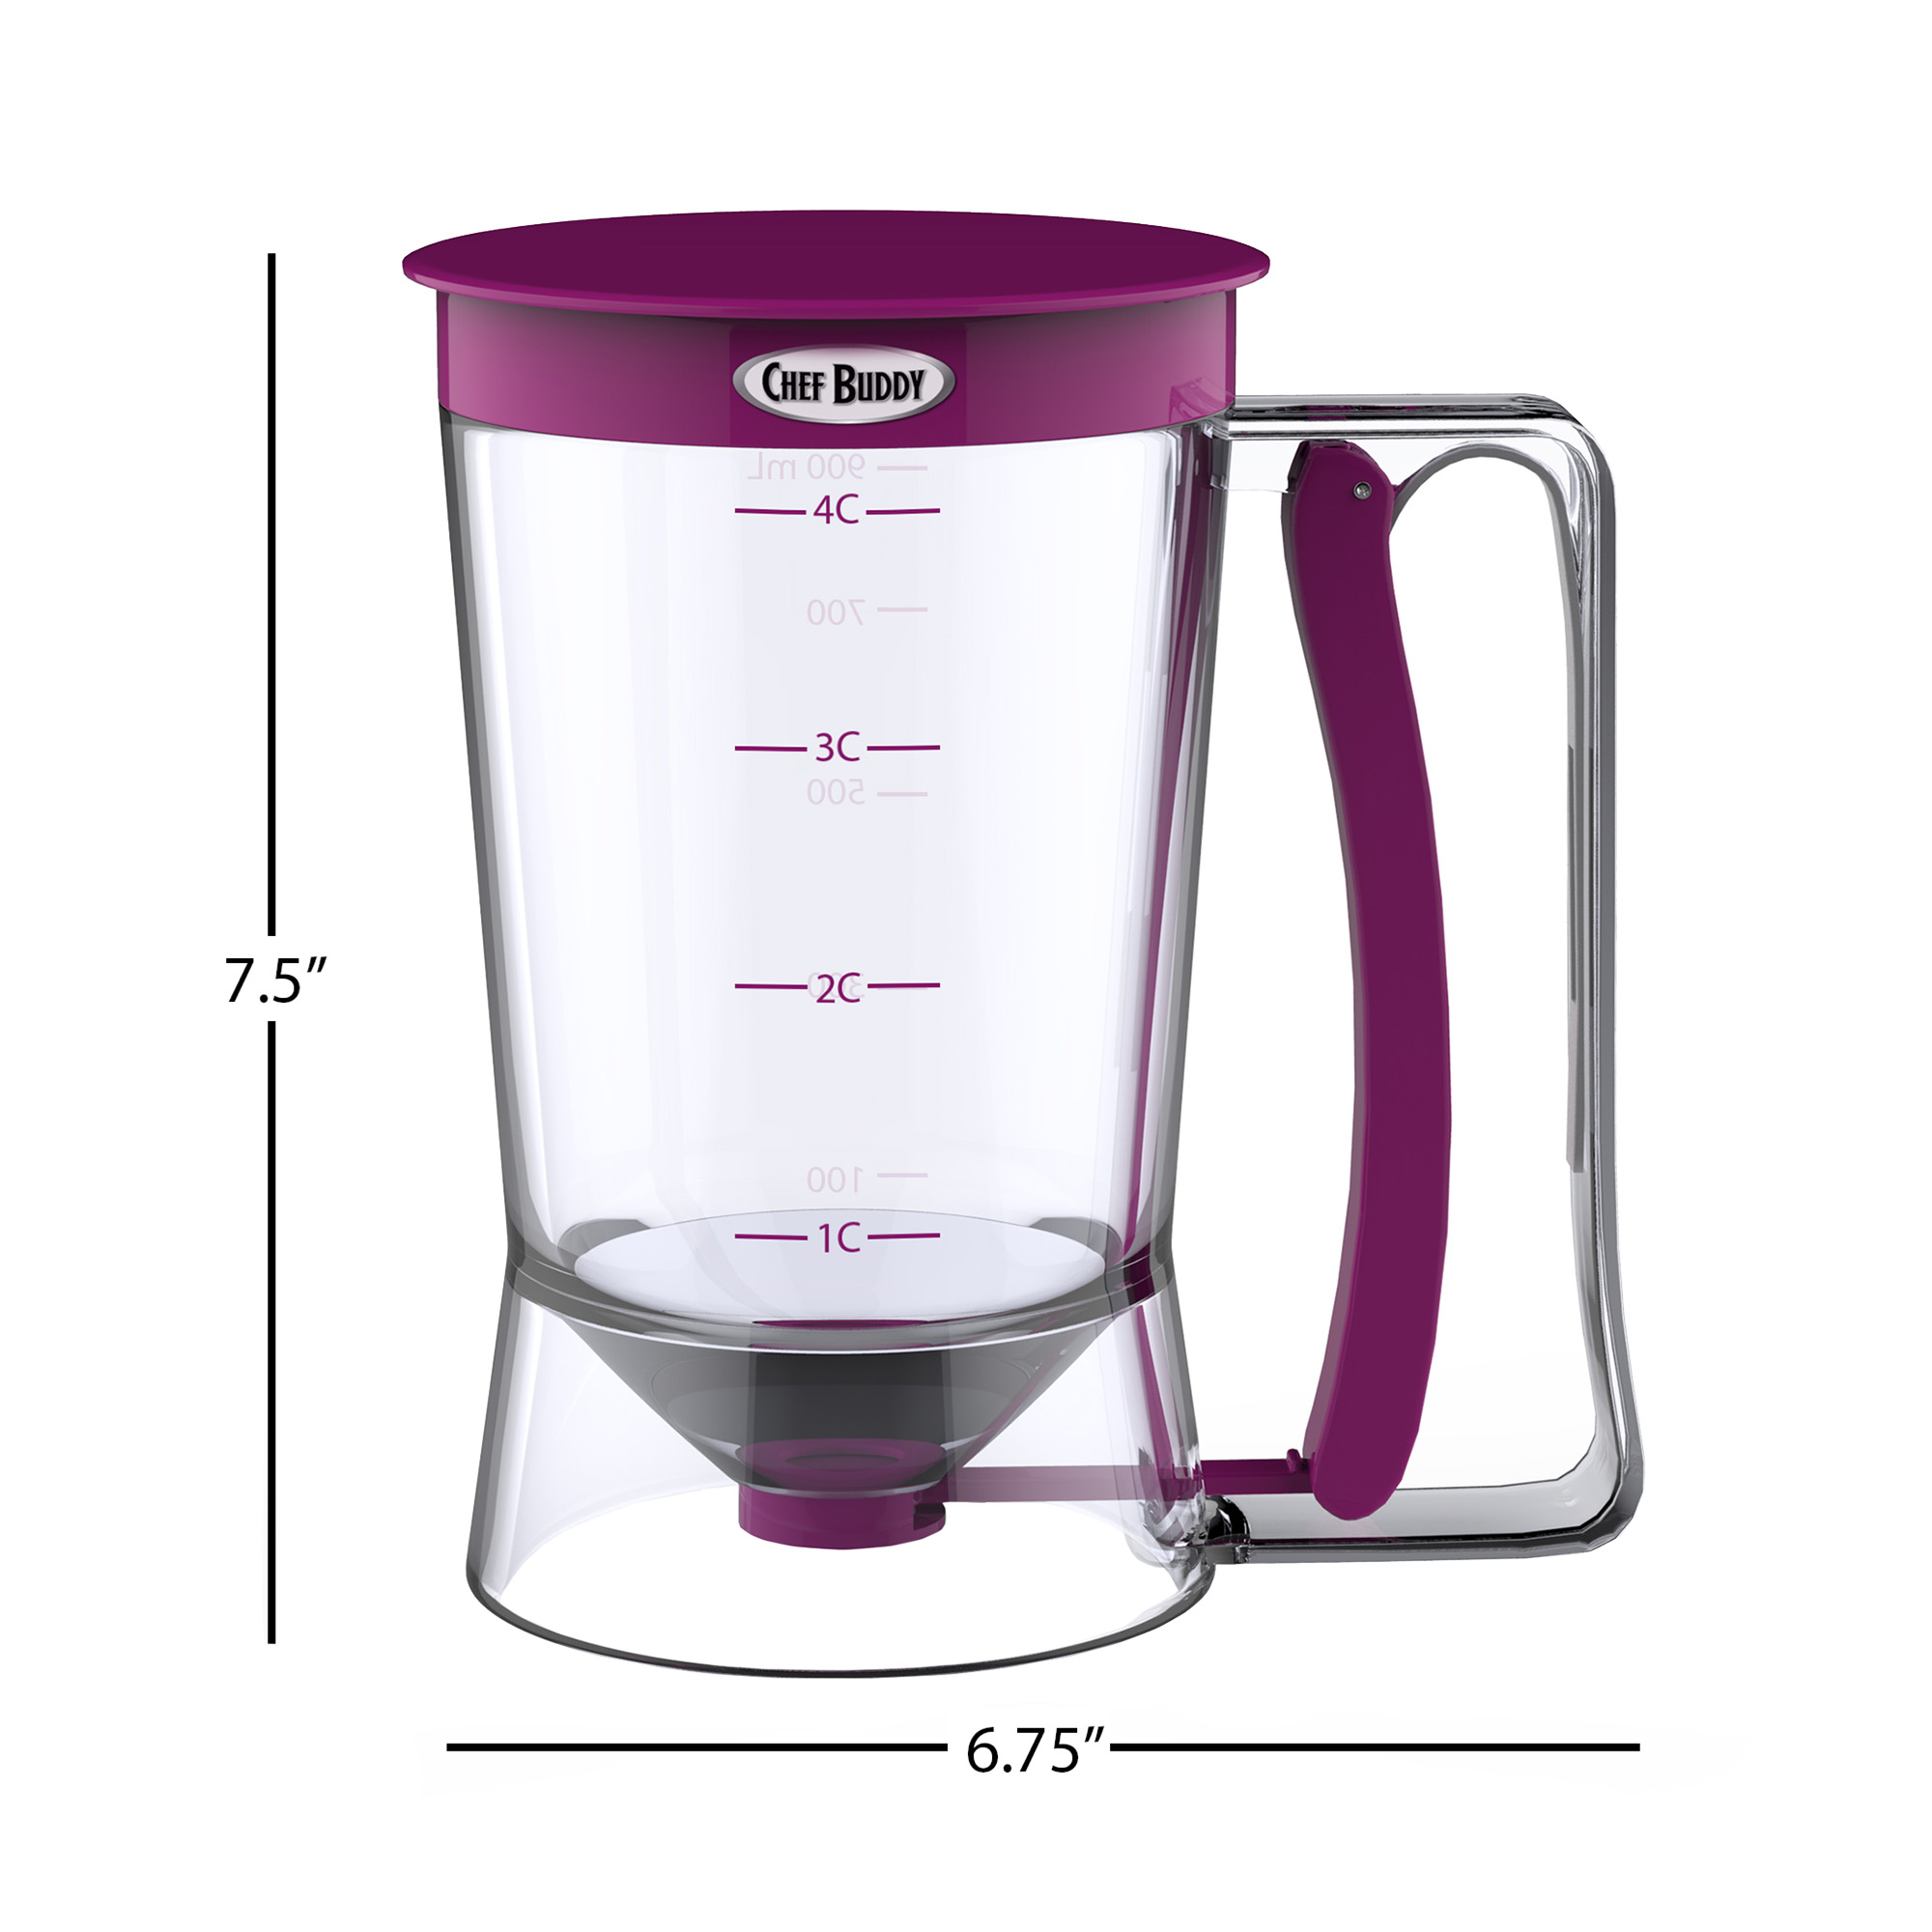 Chef Buddy Batter Dispenser, 4-Cup, Purple, Durable Plastic - image 2 of 6